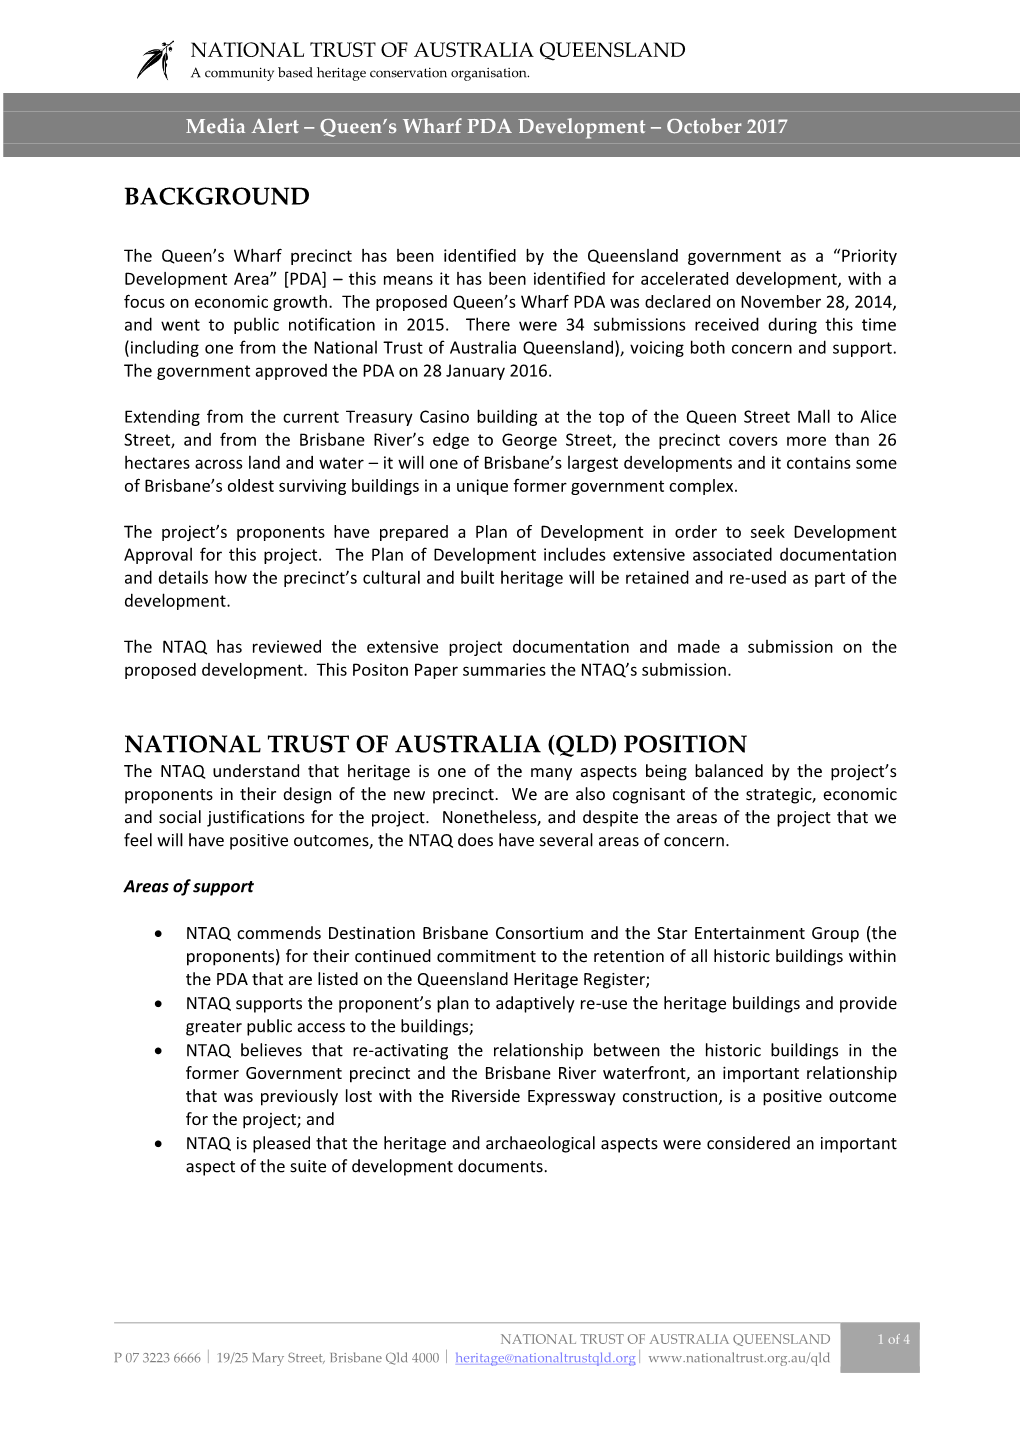 Background National Trust of Australia (Qld) Position